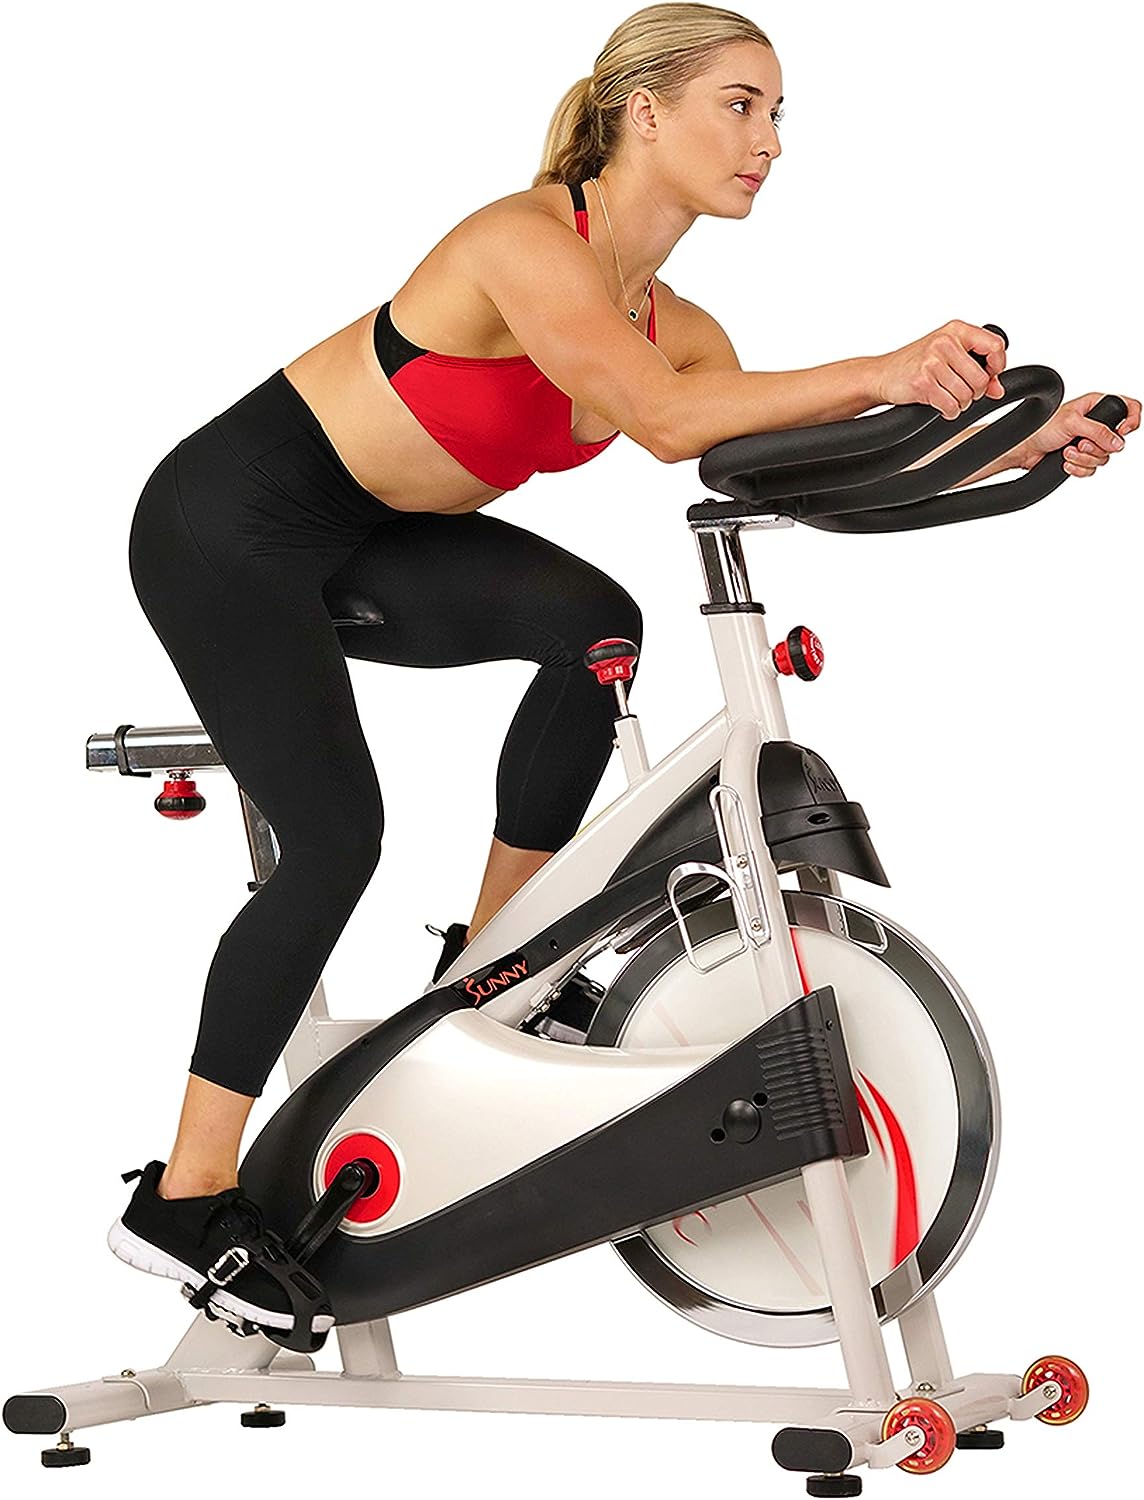 Sunny Health & Fitness Bike Review - GymDwelling